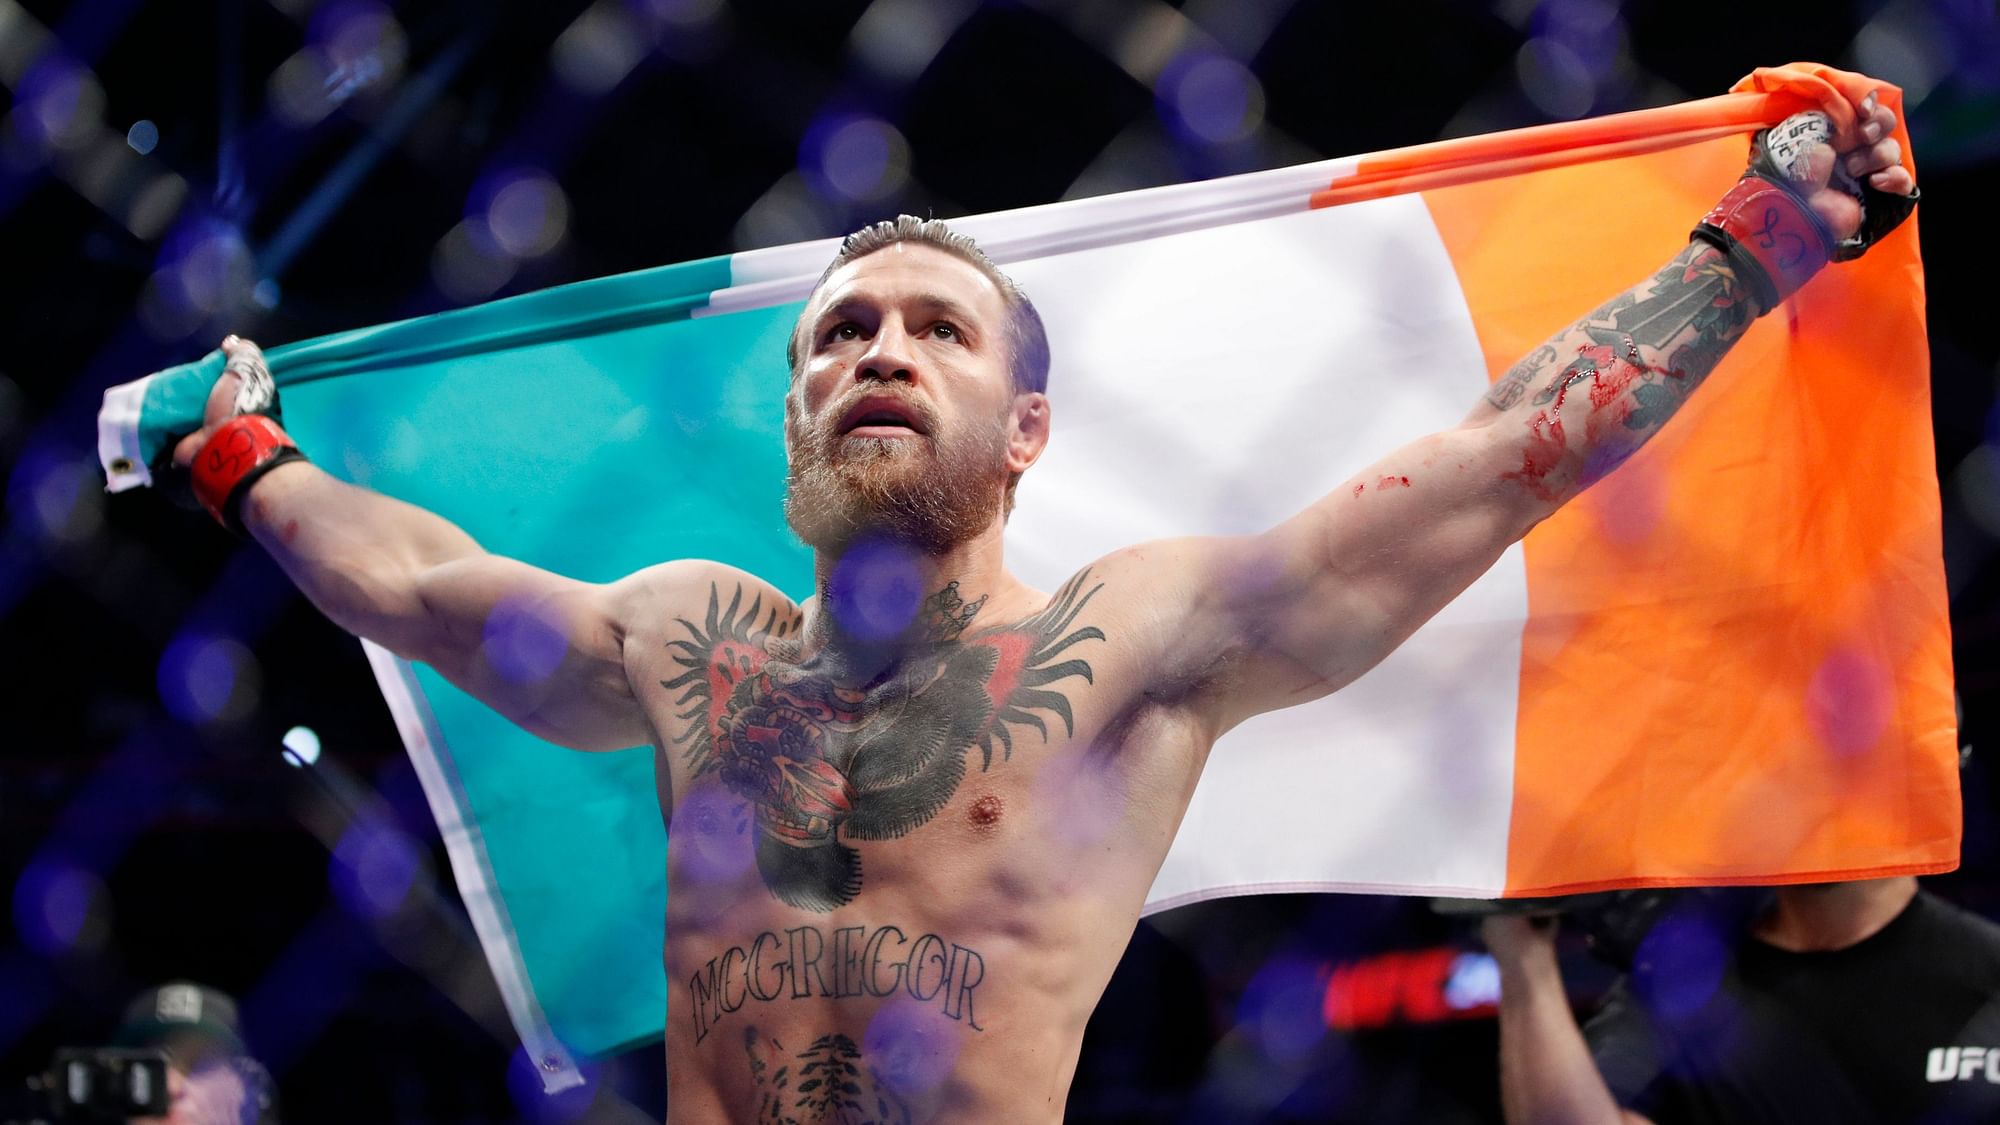 Conor McGregor celebrates after defeating Donald “Cowboy” Cerrone during a UFC 246 welterweight mixed martial arts bout Saturday, Jan. 18, 2020, in Las Vegas.